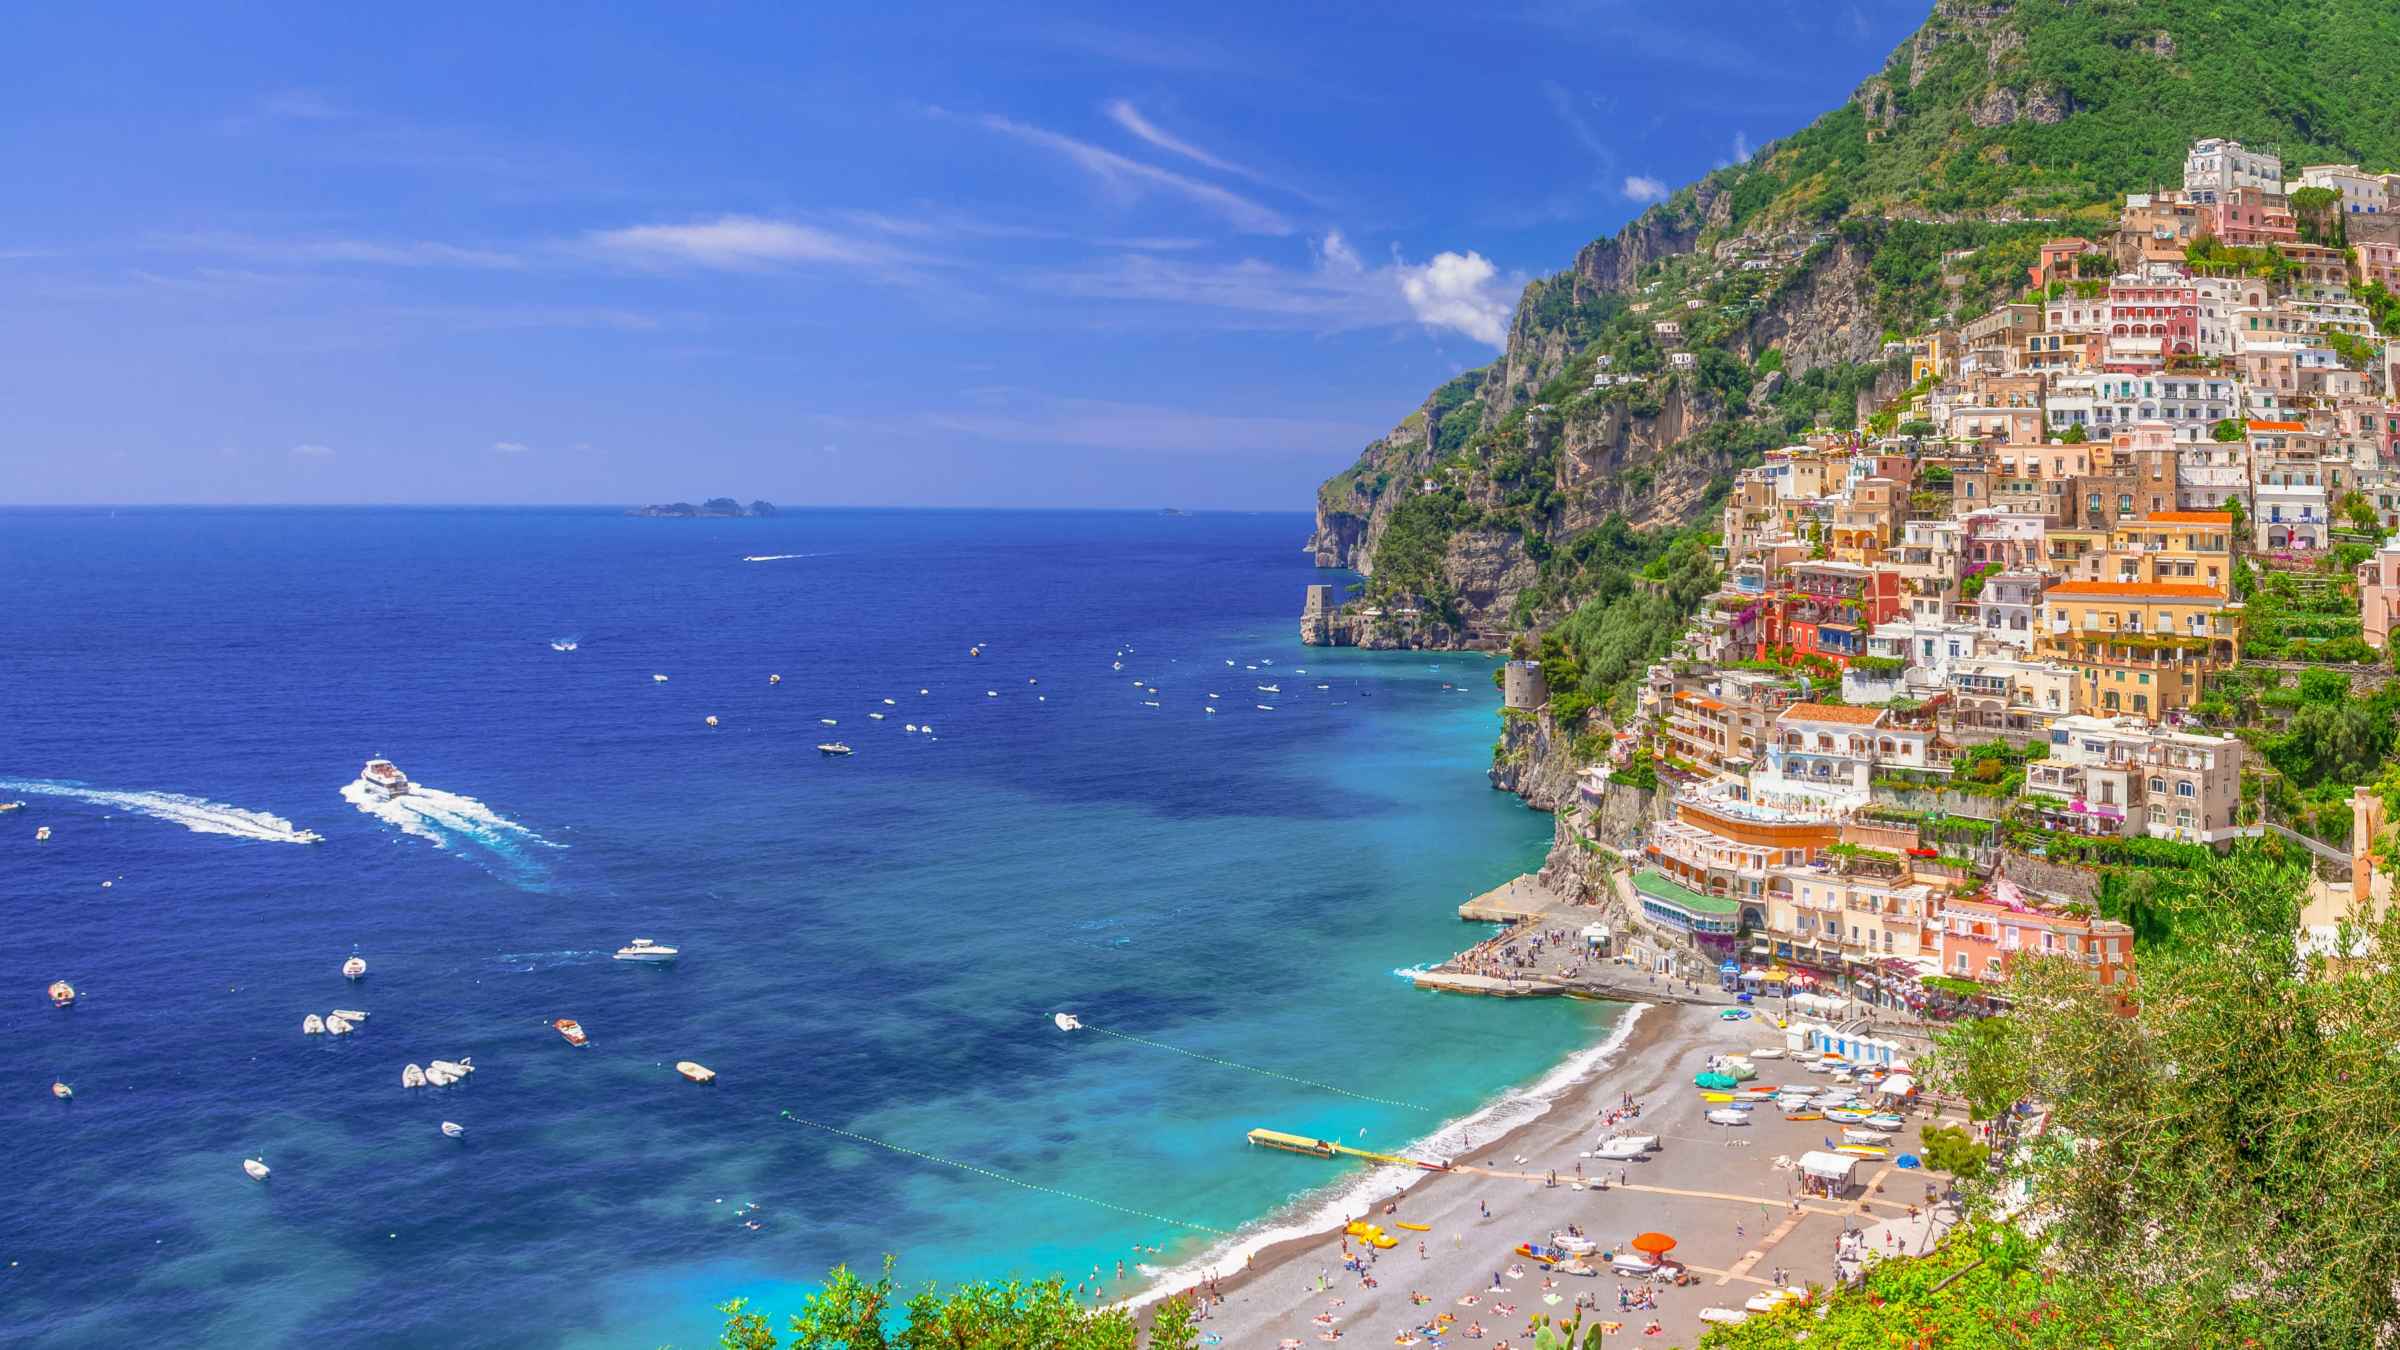 Amalfi Coast 2021 Top 10 Tours & Activities (with Photos) Things to